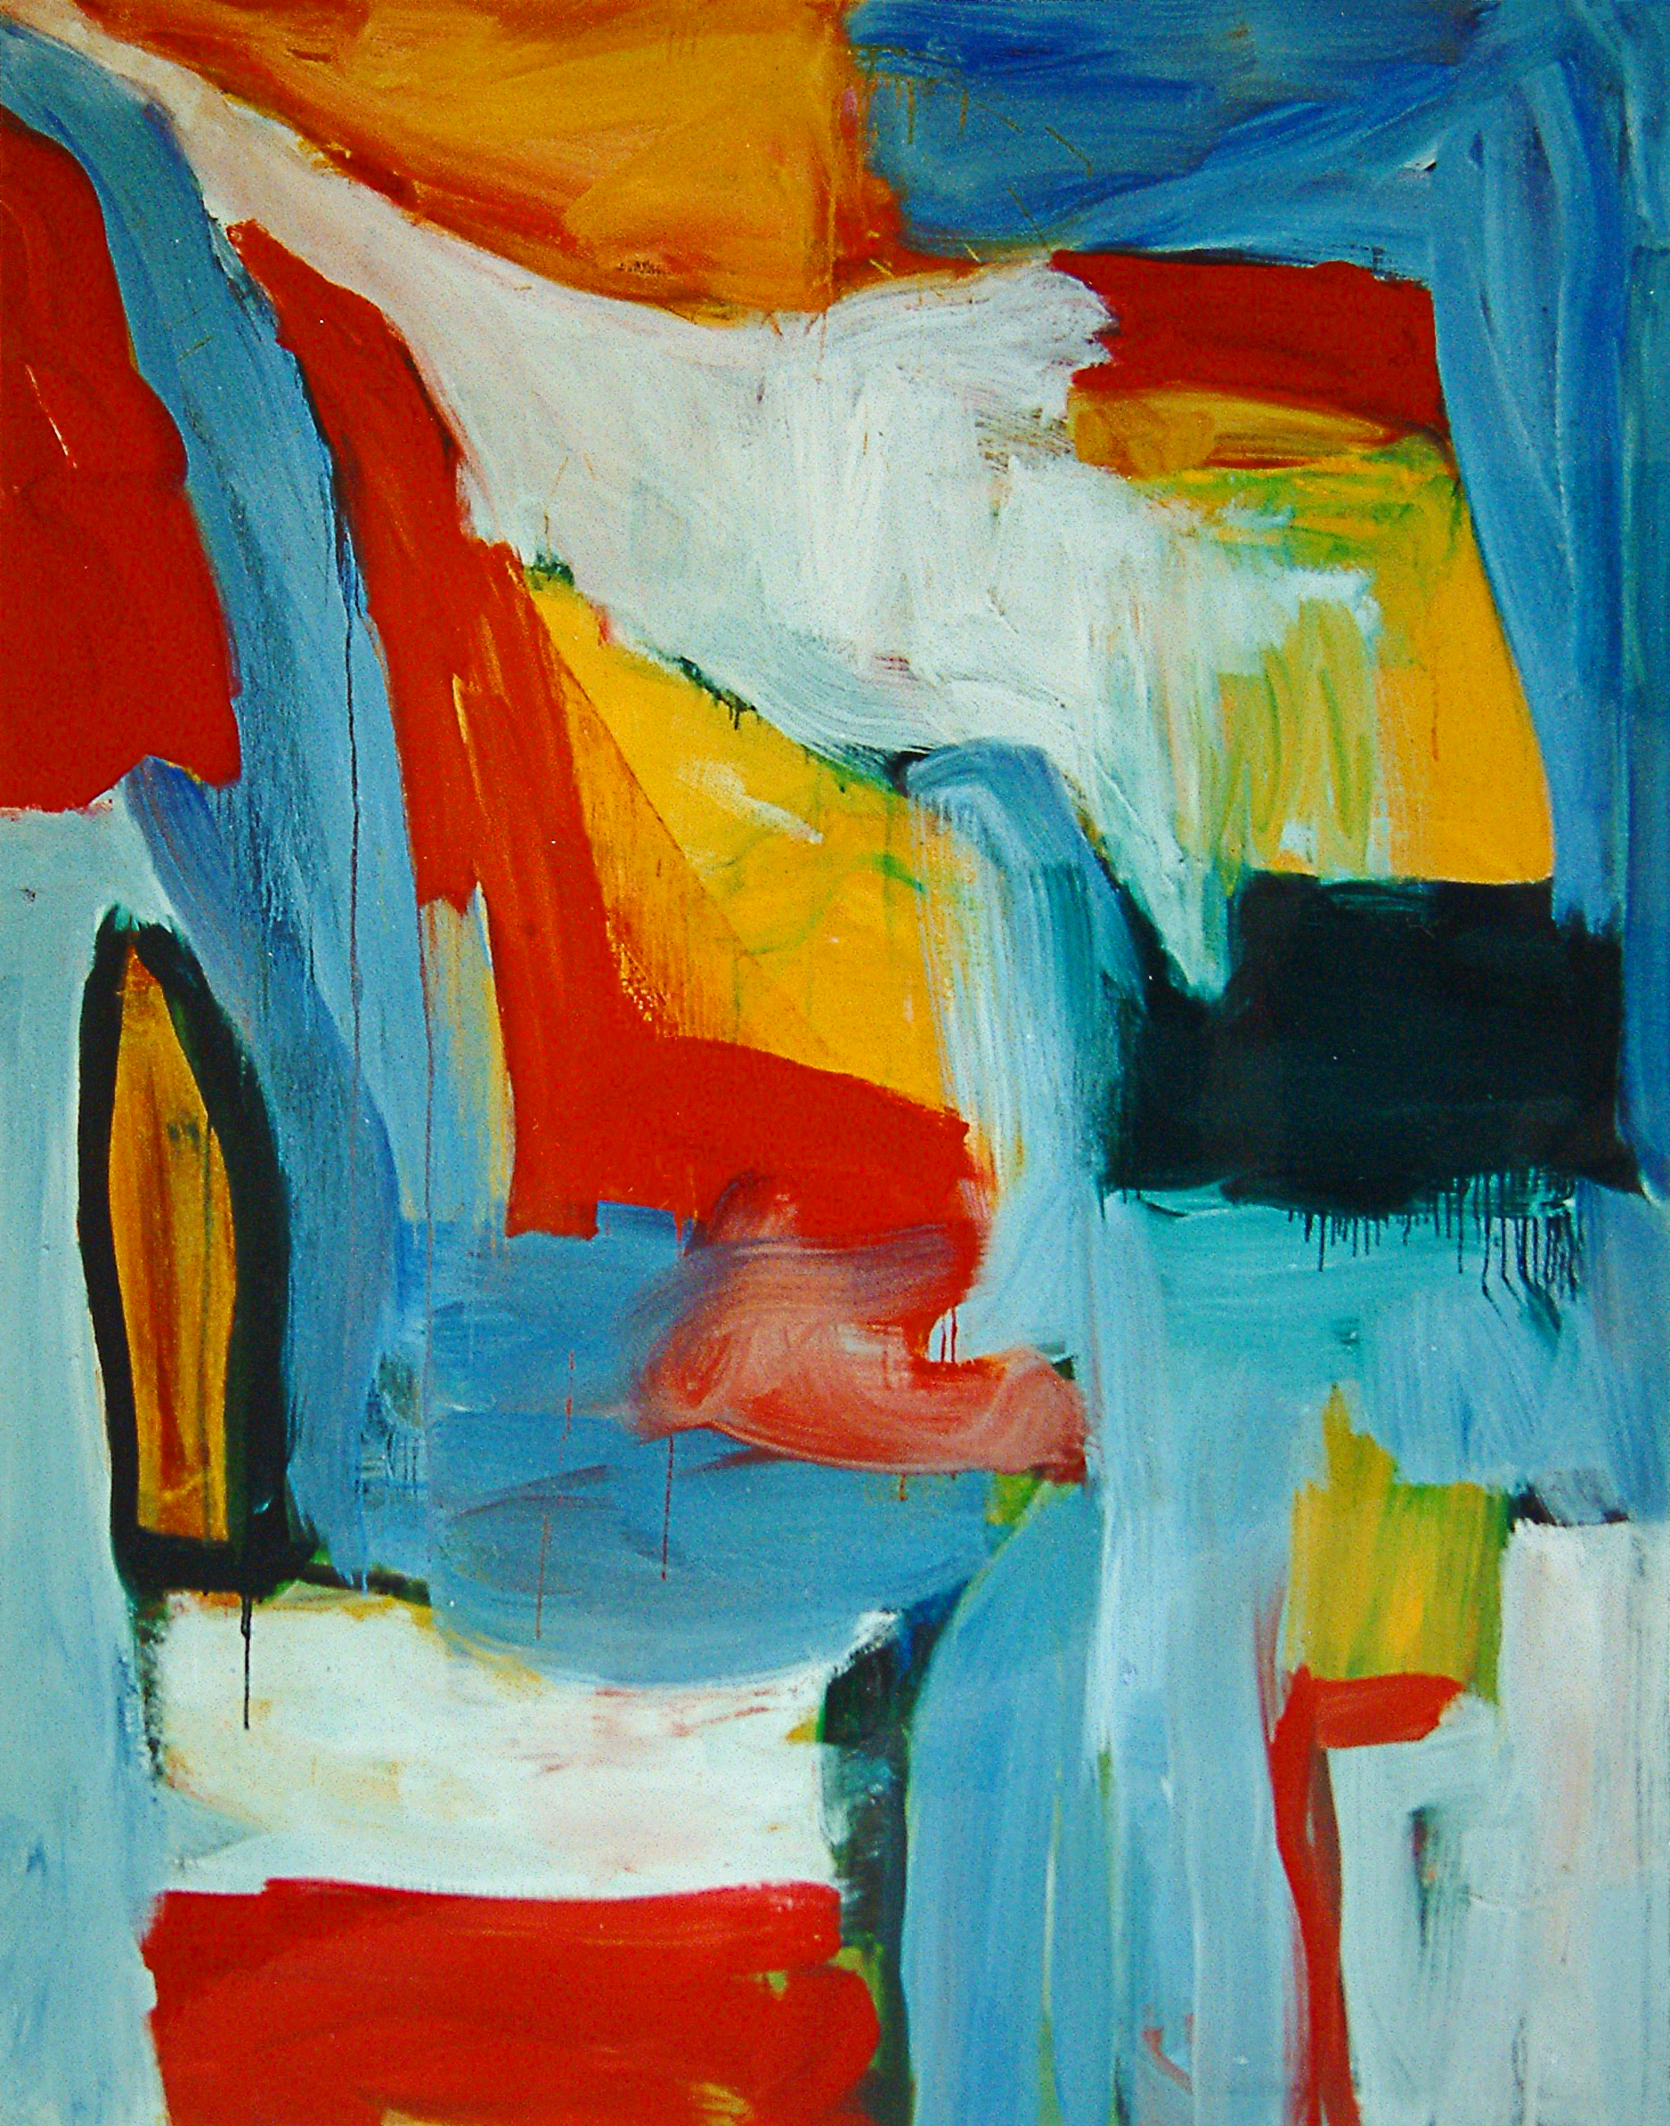 An abstract painting of large brushstrokes in red, yellow, and blue by Fons Heijnsbroek (1998). CC BY 2.0